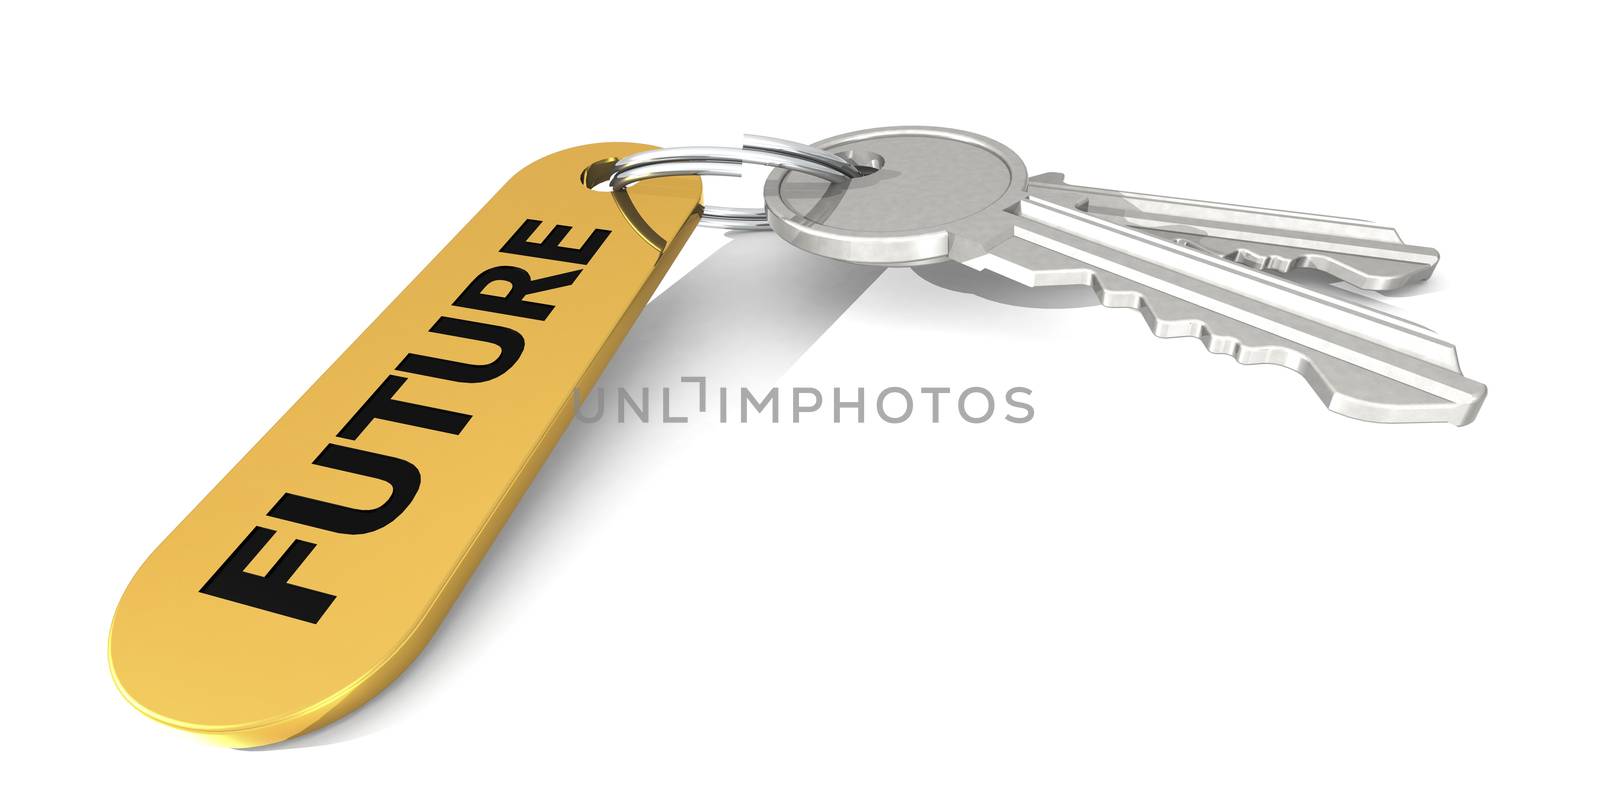 Future label attached to the keys, 3D rendering